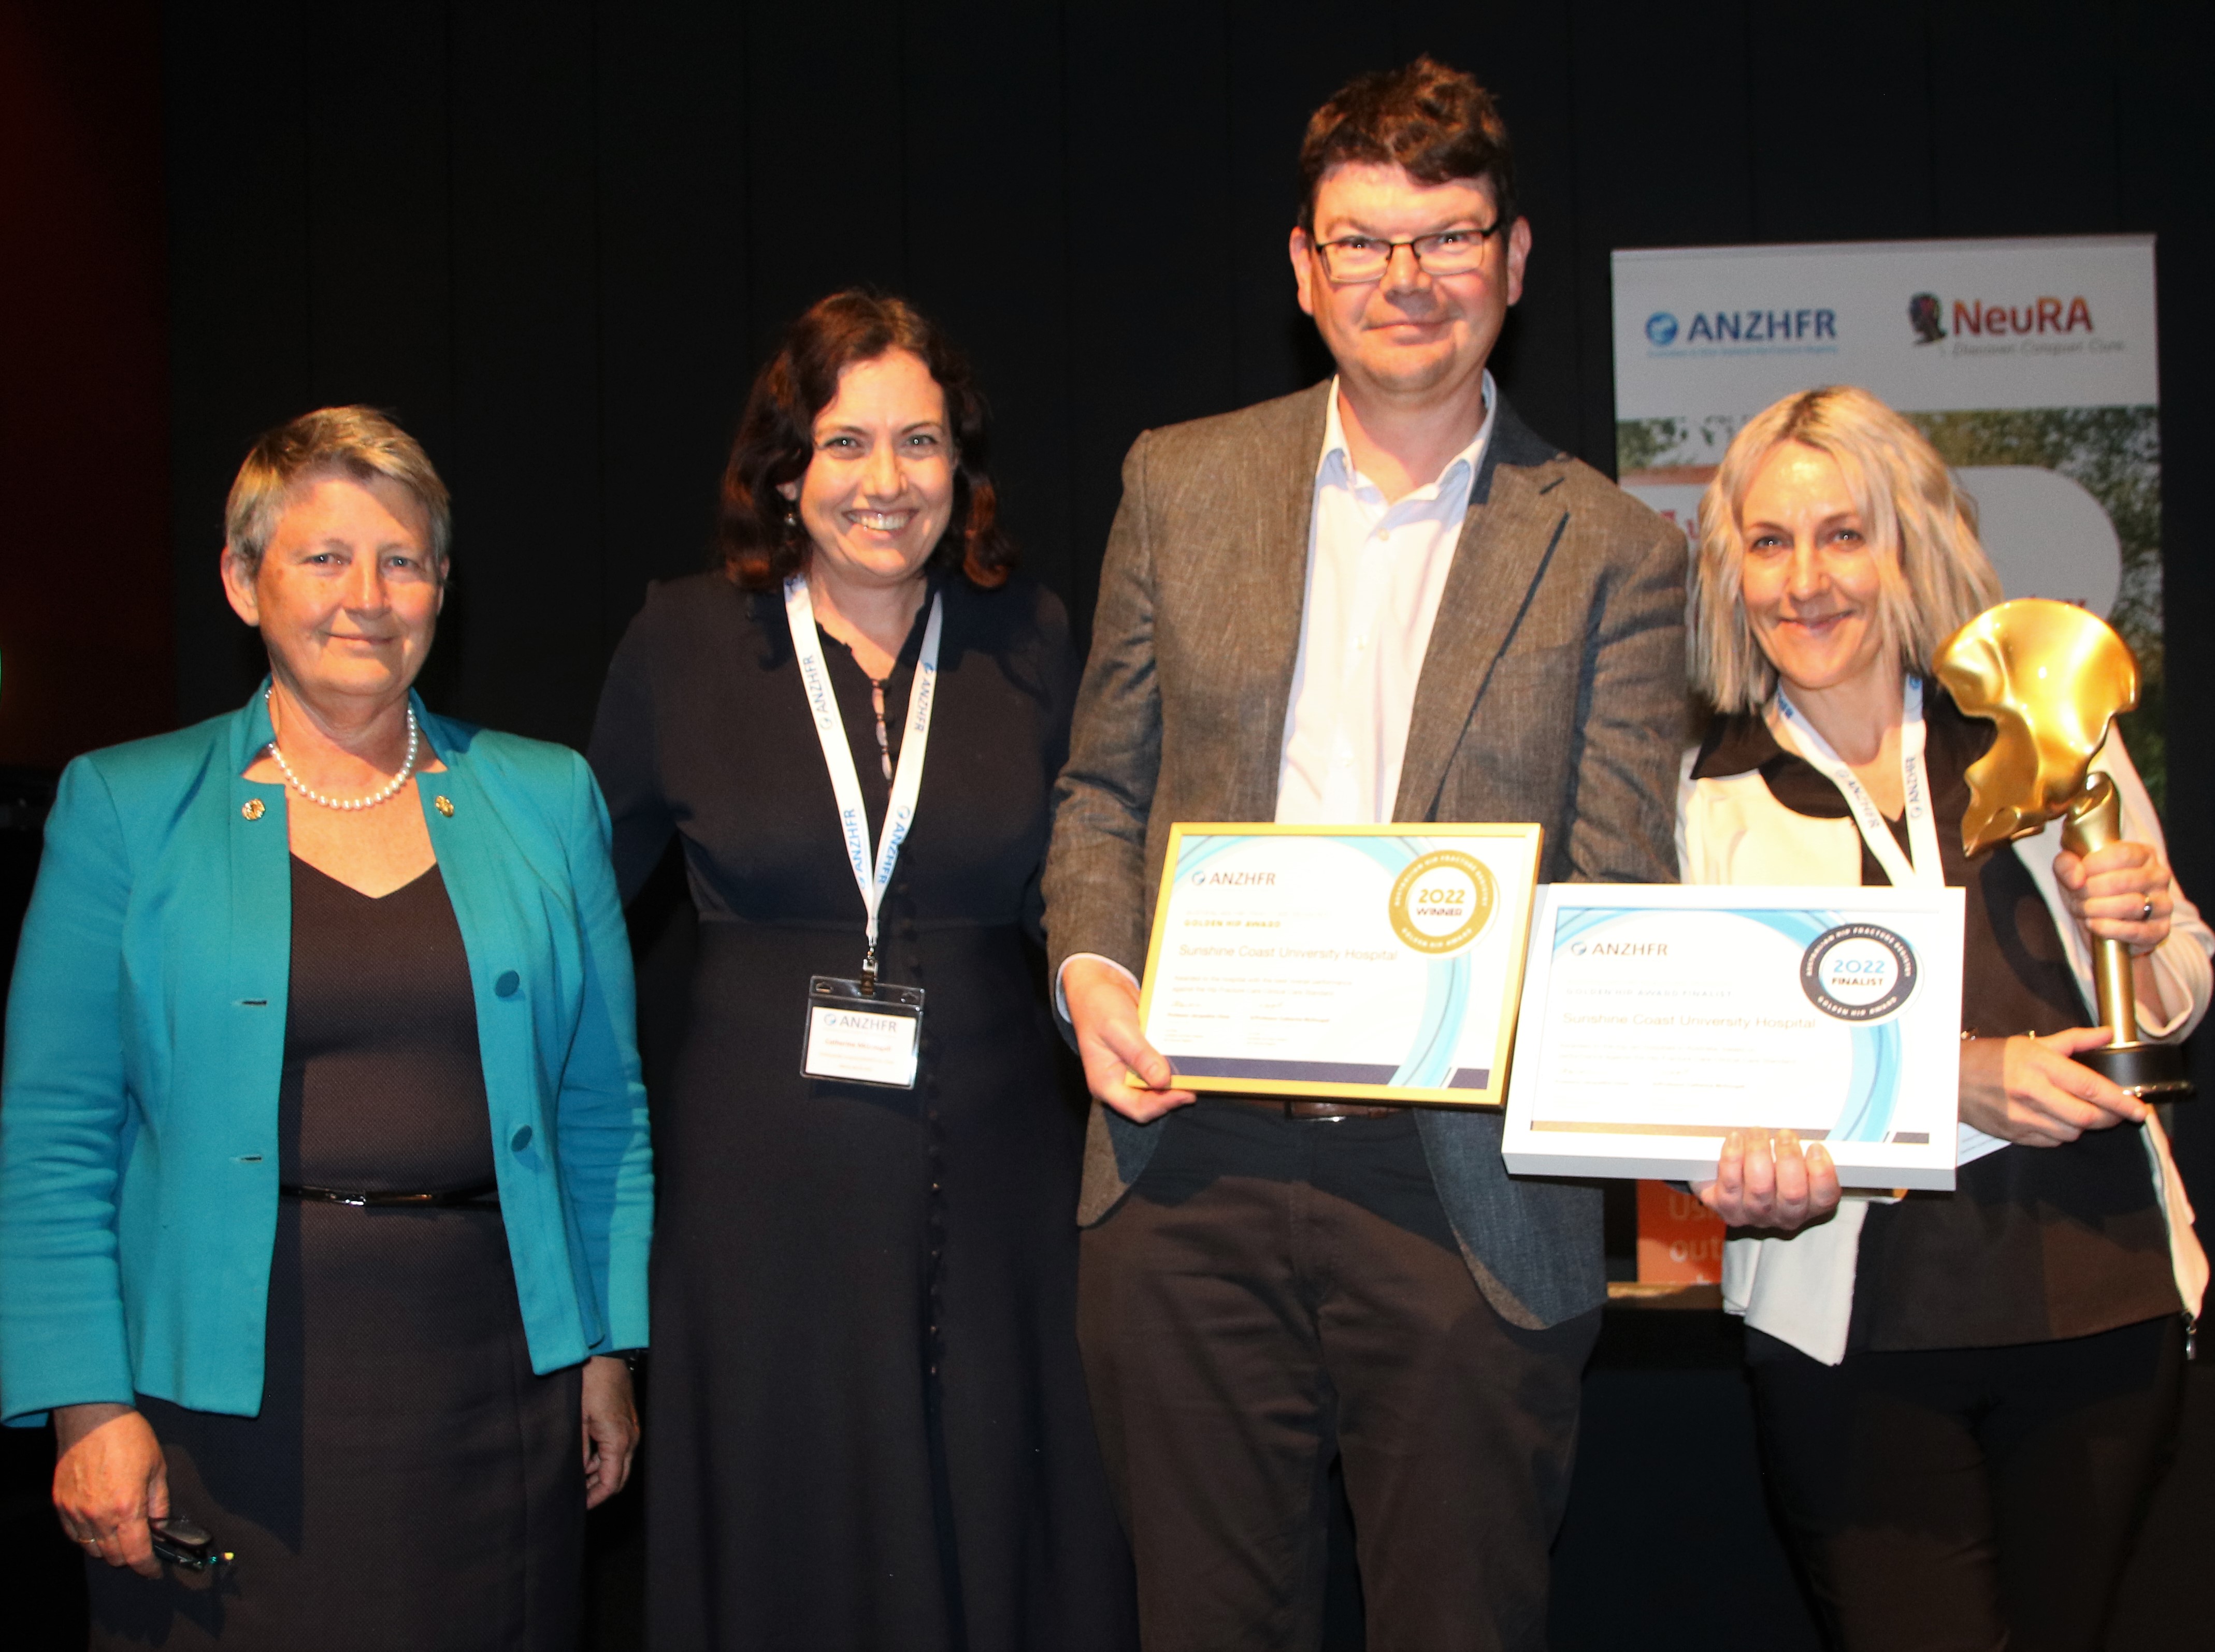 Sunshine Coast University Hospital accepts Golden Hip award for Best Performing Hospital, Australia. 
Pictured: Dr Annette Holian (President, AOA), A/Professor Catherine McDougall (Co-Chair, ANZHFR), Dr Stephen Murray (Geriatrician, SCUH) and Ms Nicol Lightbody (Clinical Nurse Consultant, Orthopaedics, SCUH)